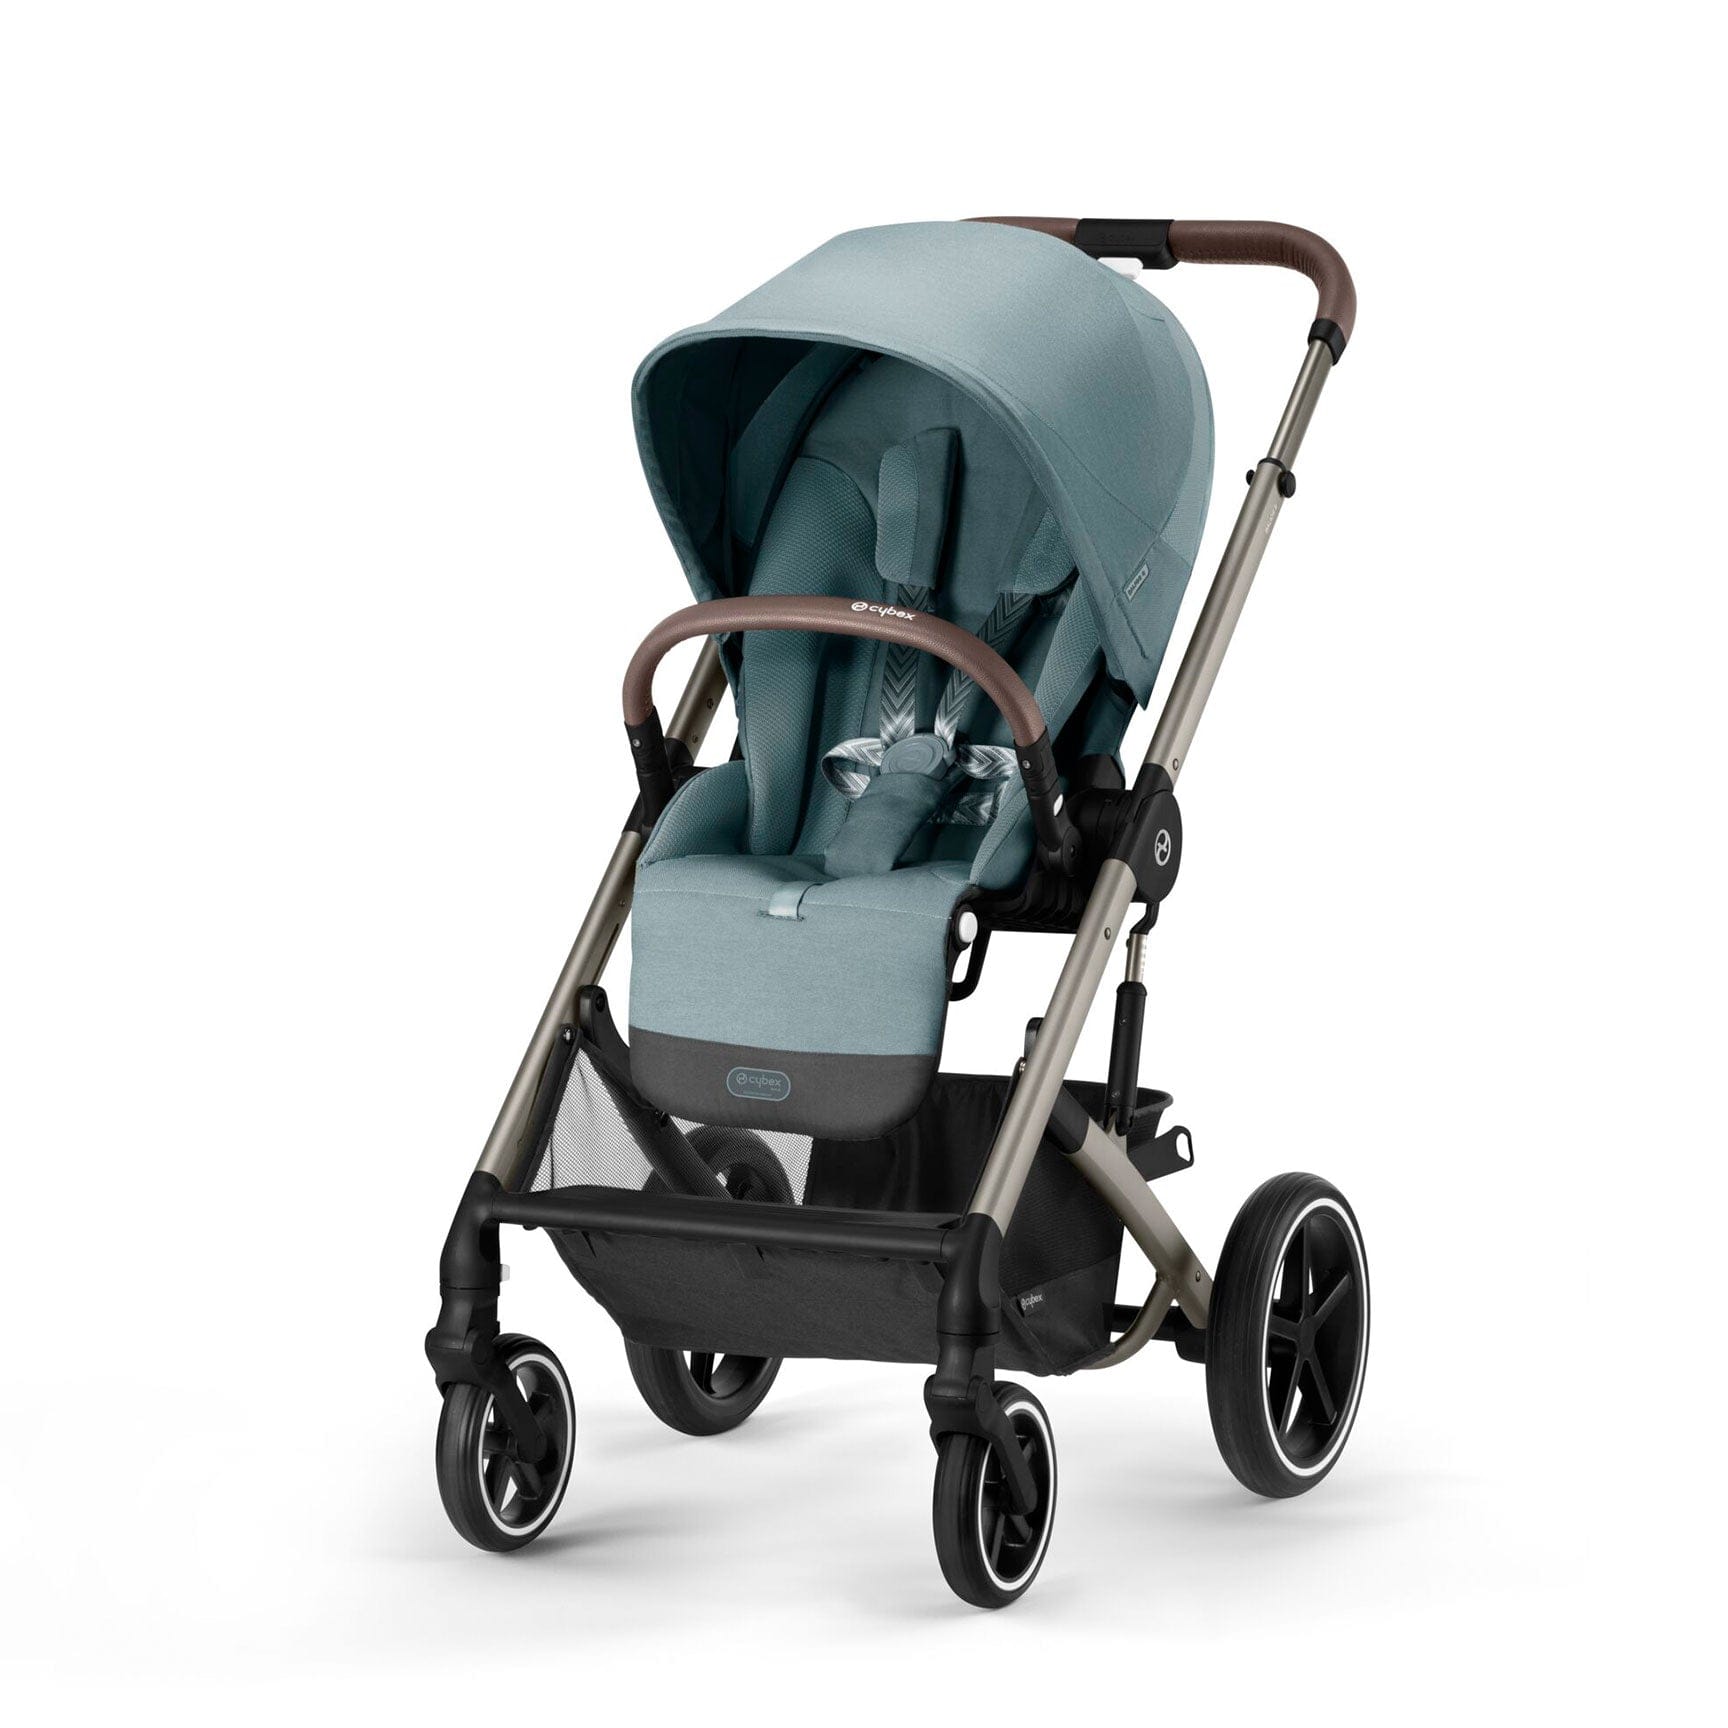 Cybex Balios Comfort Bundle in Taupe/Sky Blue Travel Systems 127458-TPE-SKY-BLU 4063846318049